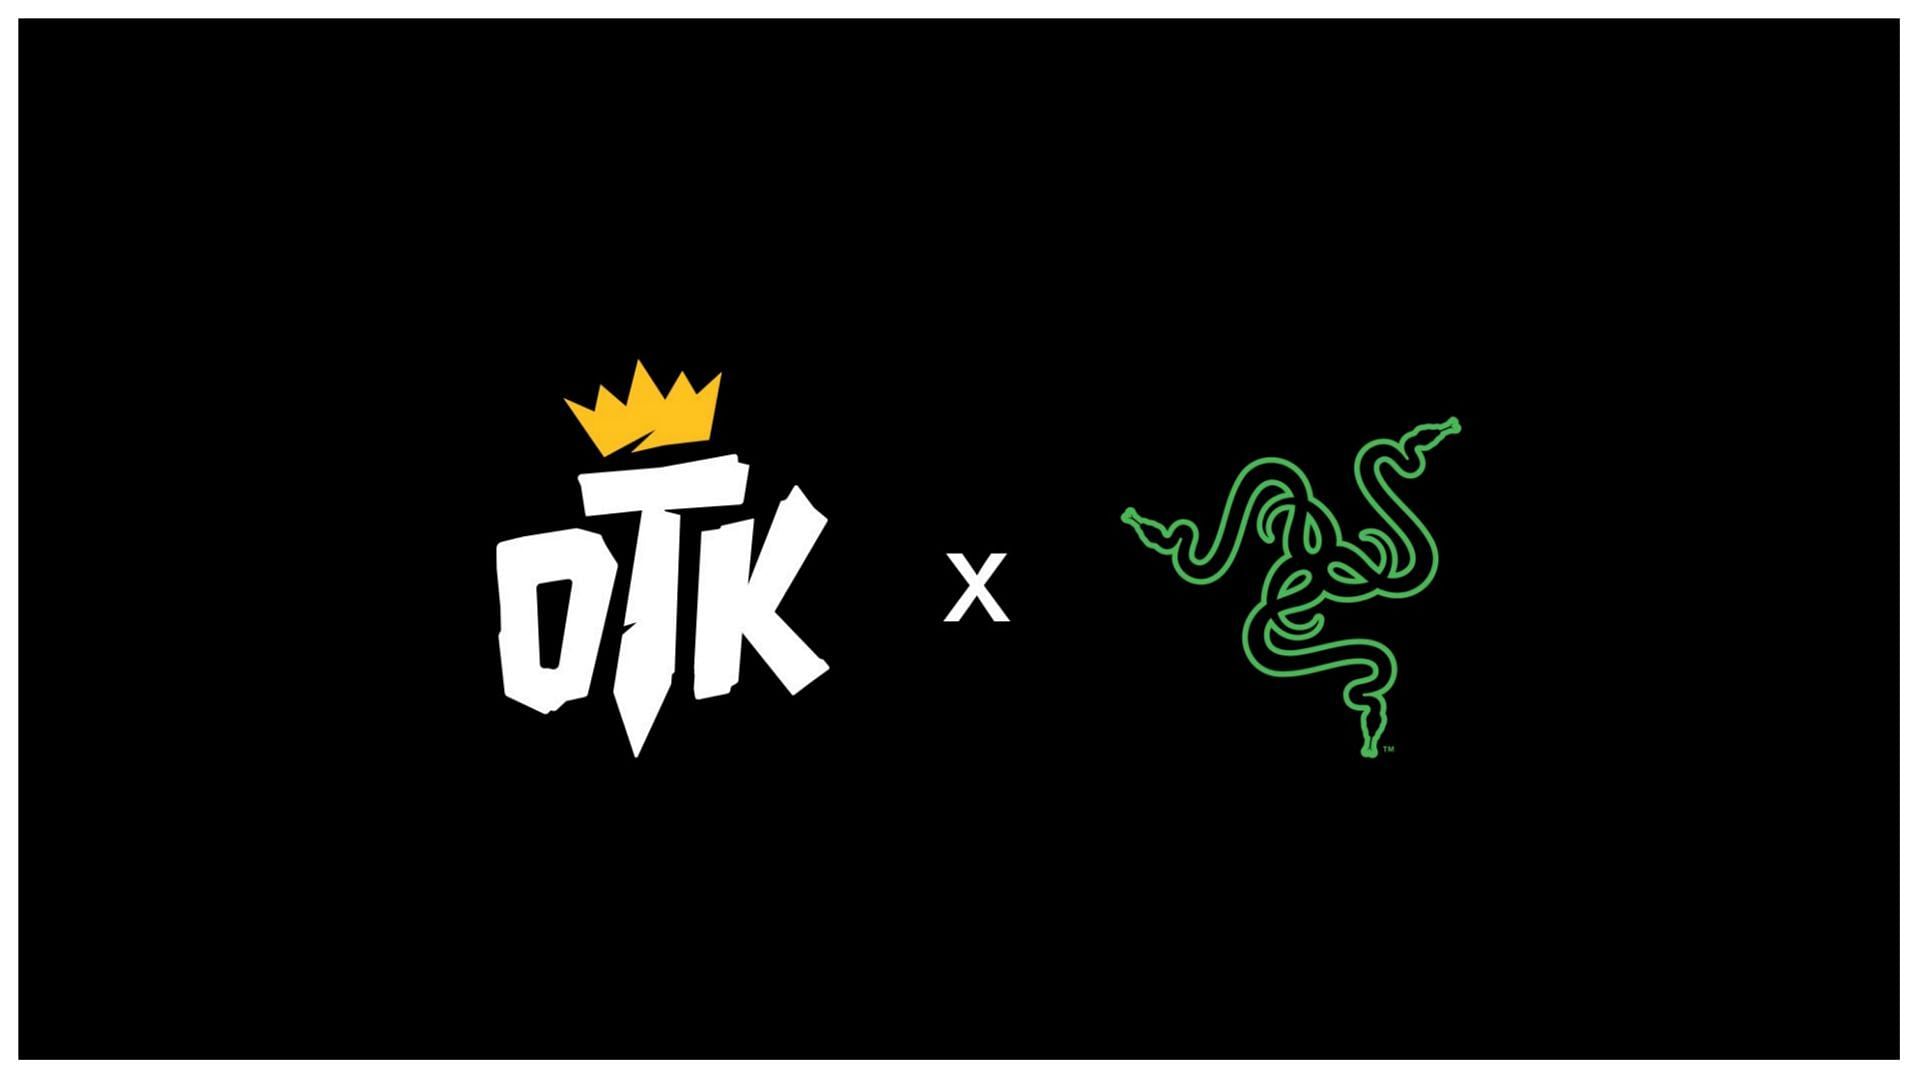 OTK announced their official partnership with Razer via a video posted on Twitter (Image via Twitter)